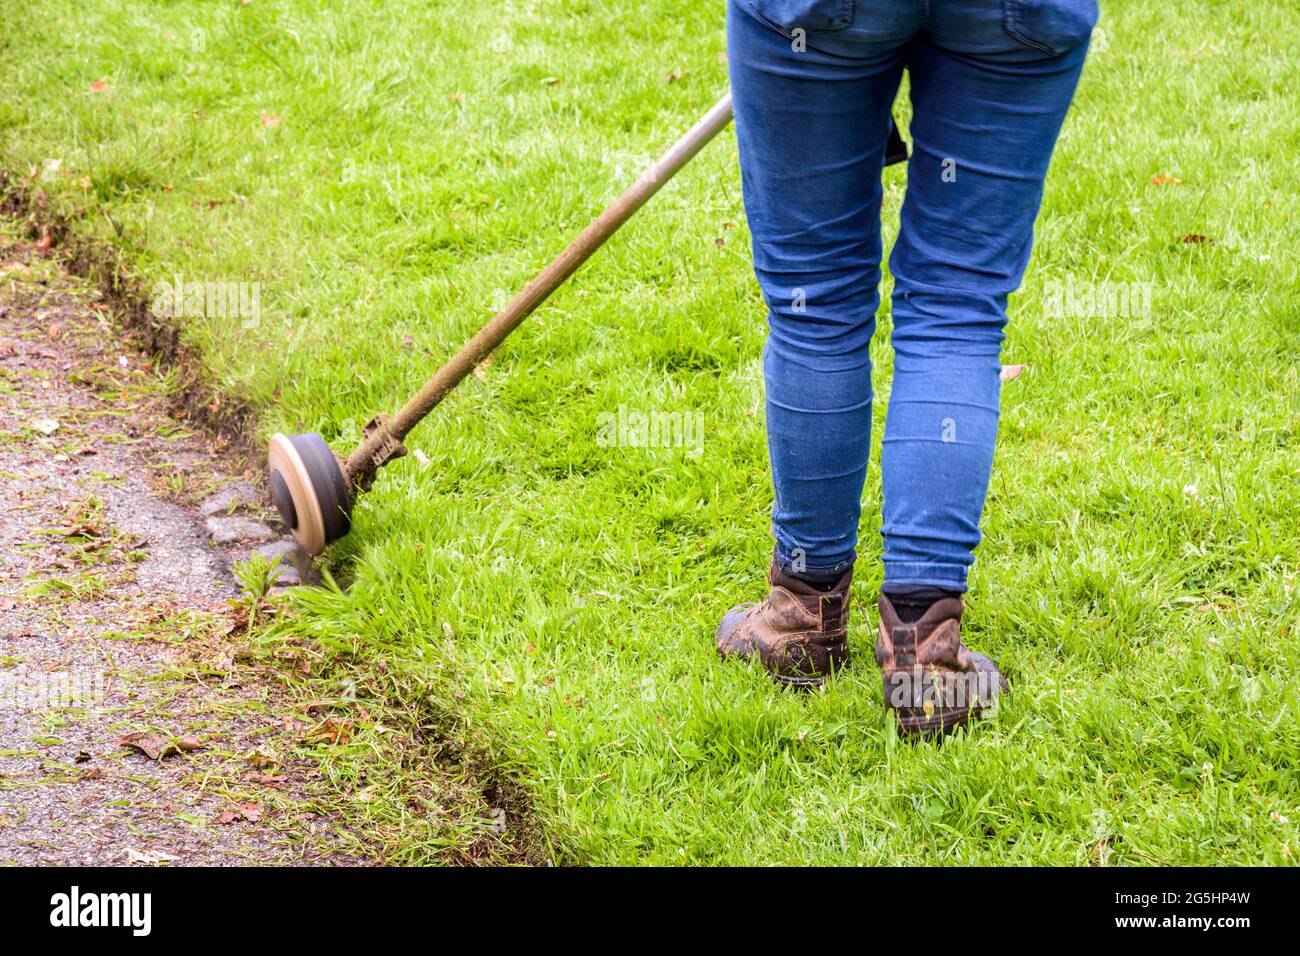 A woman is using a string trimmer to edge the lawn along the driveway. Stock Photo